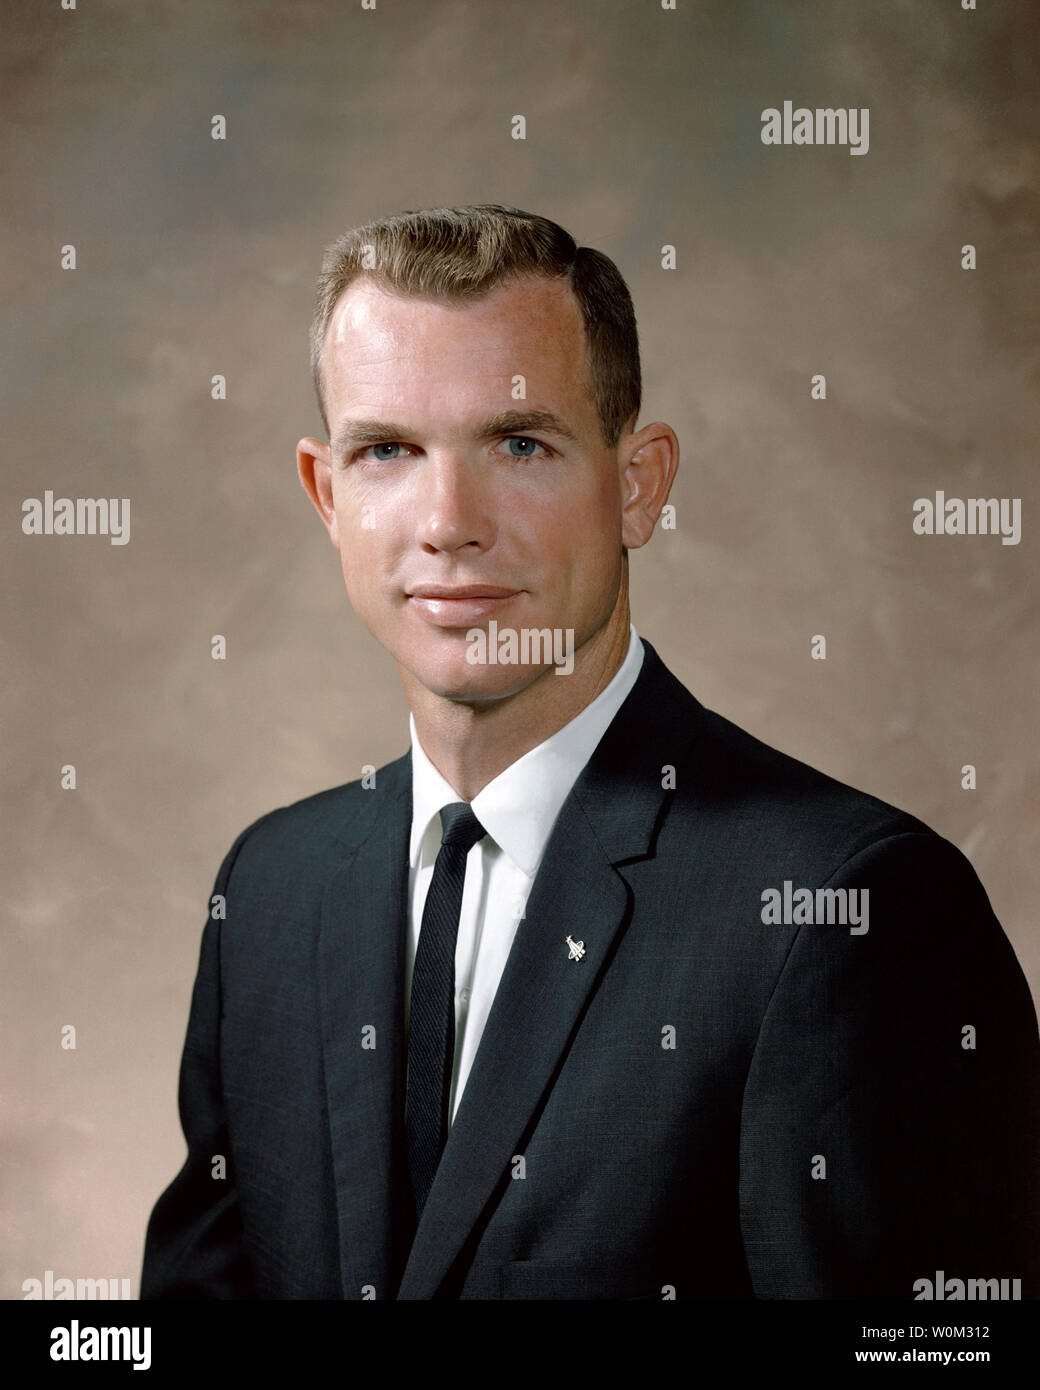 Official portrait of NASA astronaut David Scott taken in 1964. Scott, on his first spaceflight, was pilot for the Gemini 8 mission. March 16, 2016 marks the 50th anniversary of NASA's Gemini 8 mission, the sixth manned spaceflight conducted during the United States' Project Gemini program. The primary objective of the mission, the successful docking of two spacecraft in orbit, a first in spaceflight, was a success though the crew would experience a critical in-space system failure, forcing them to abandon the mission prematurely. UPI Stock Photo